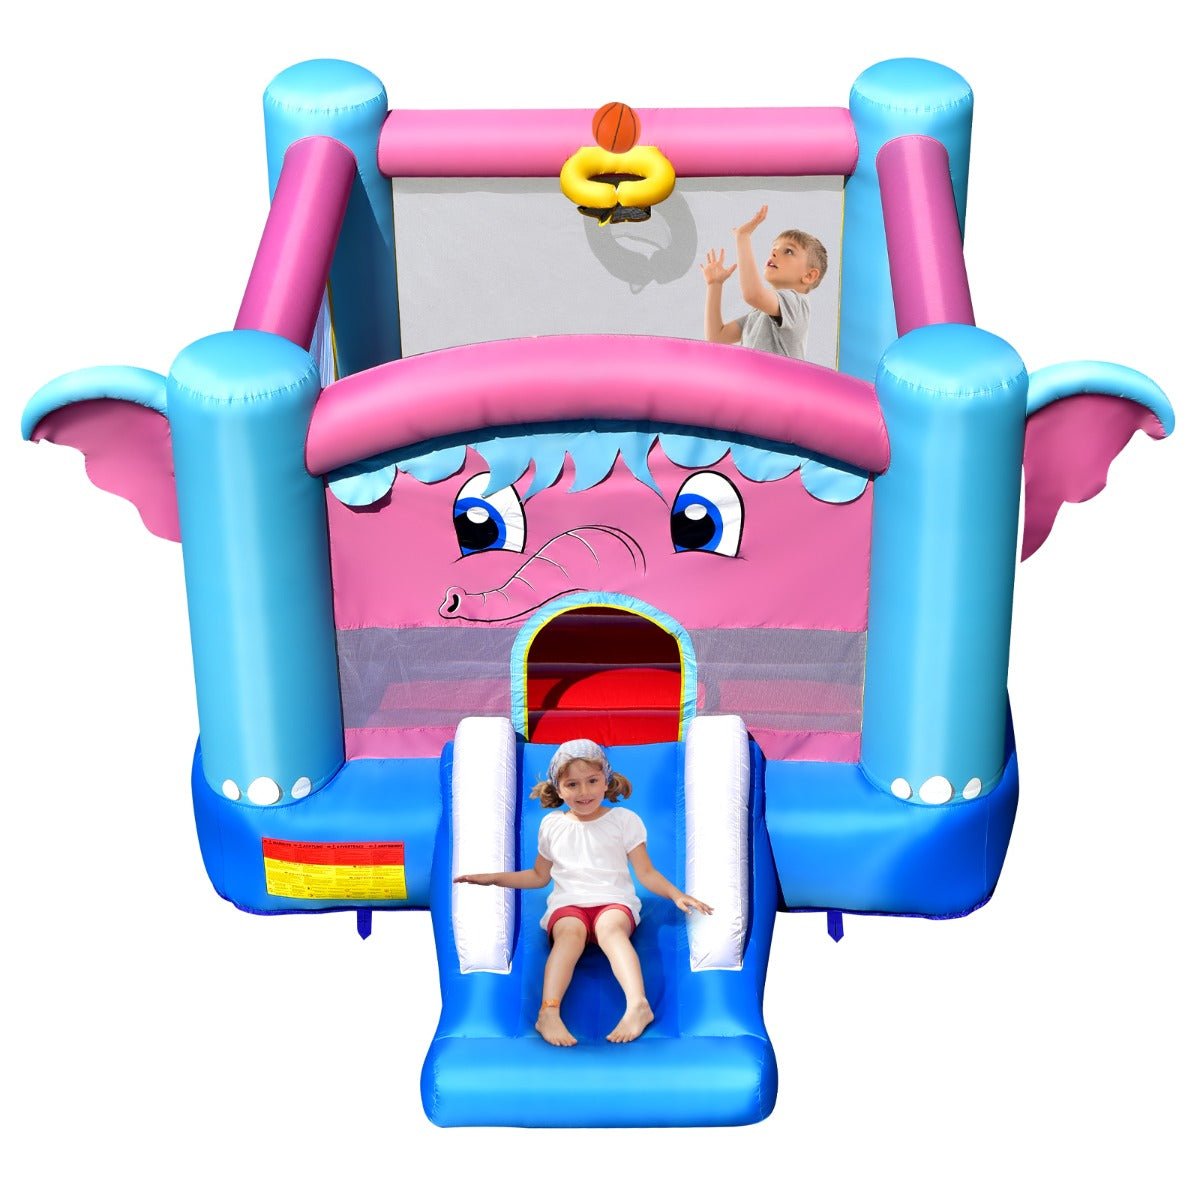 Inflatable Jumping Castle - Where Imagination Takes Flight